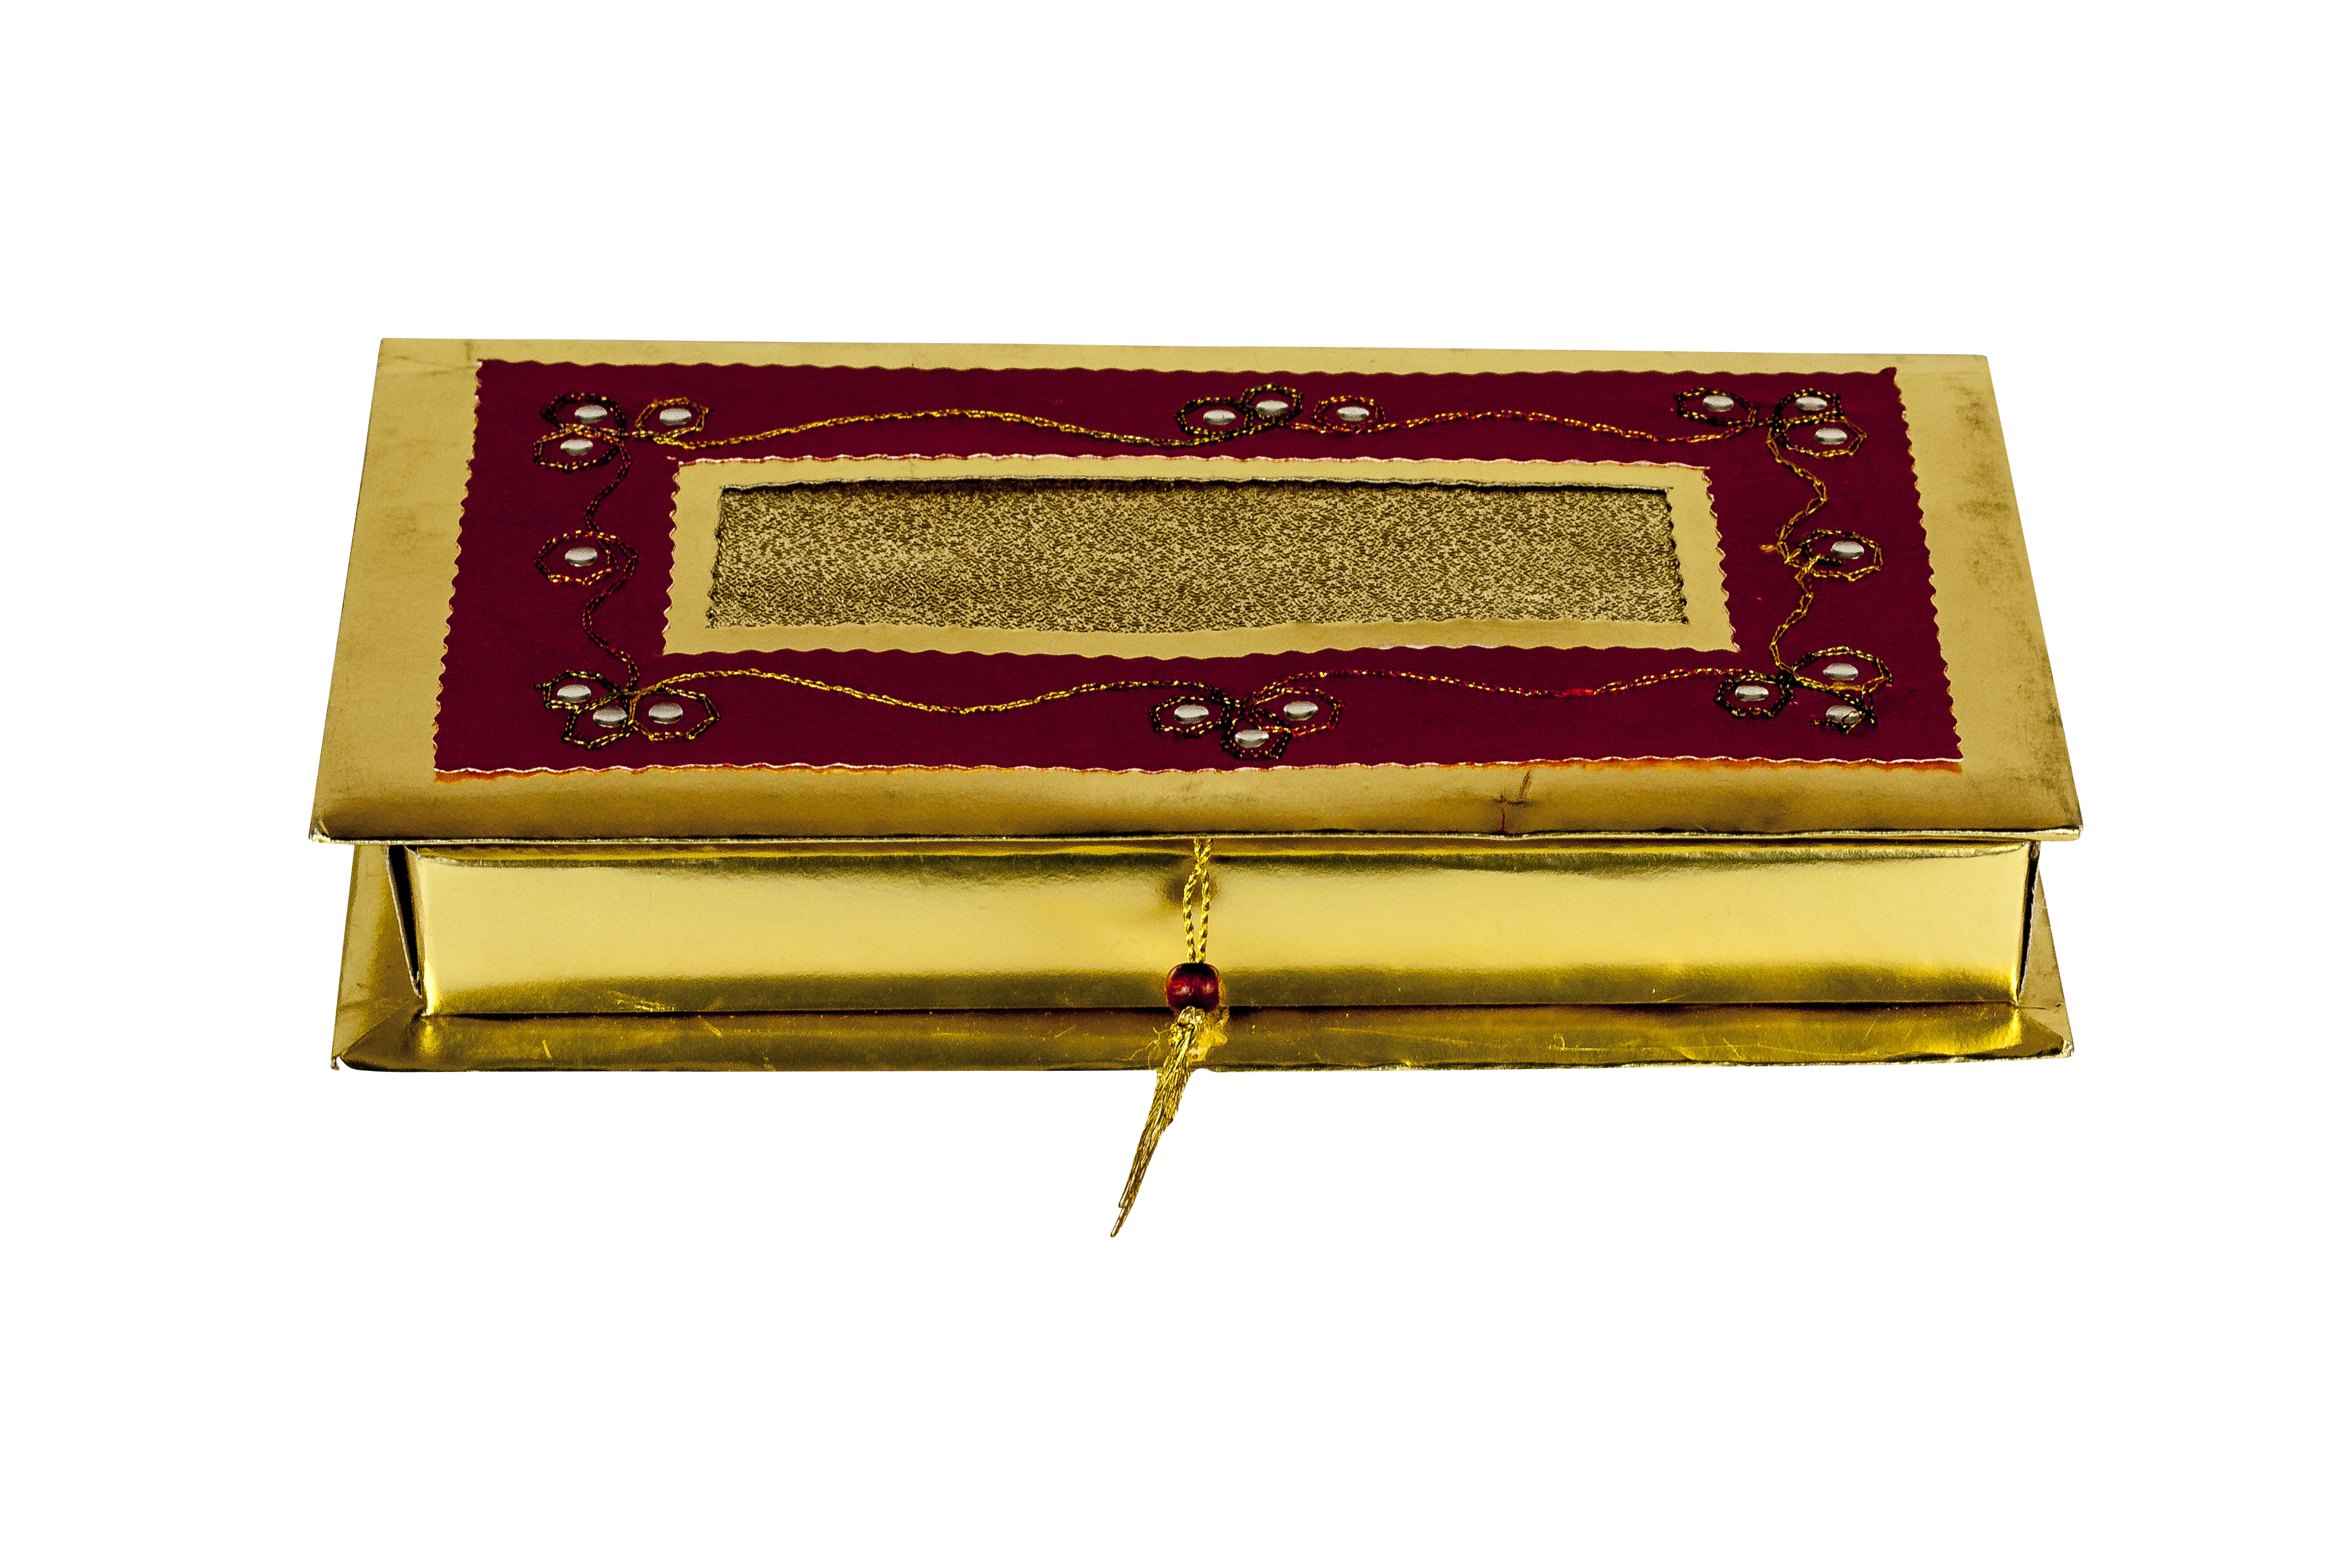 A Gold Box With A Red And Gold Design